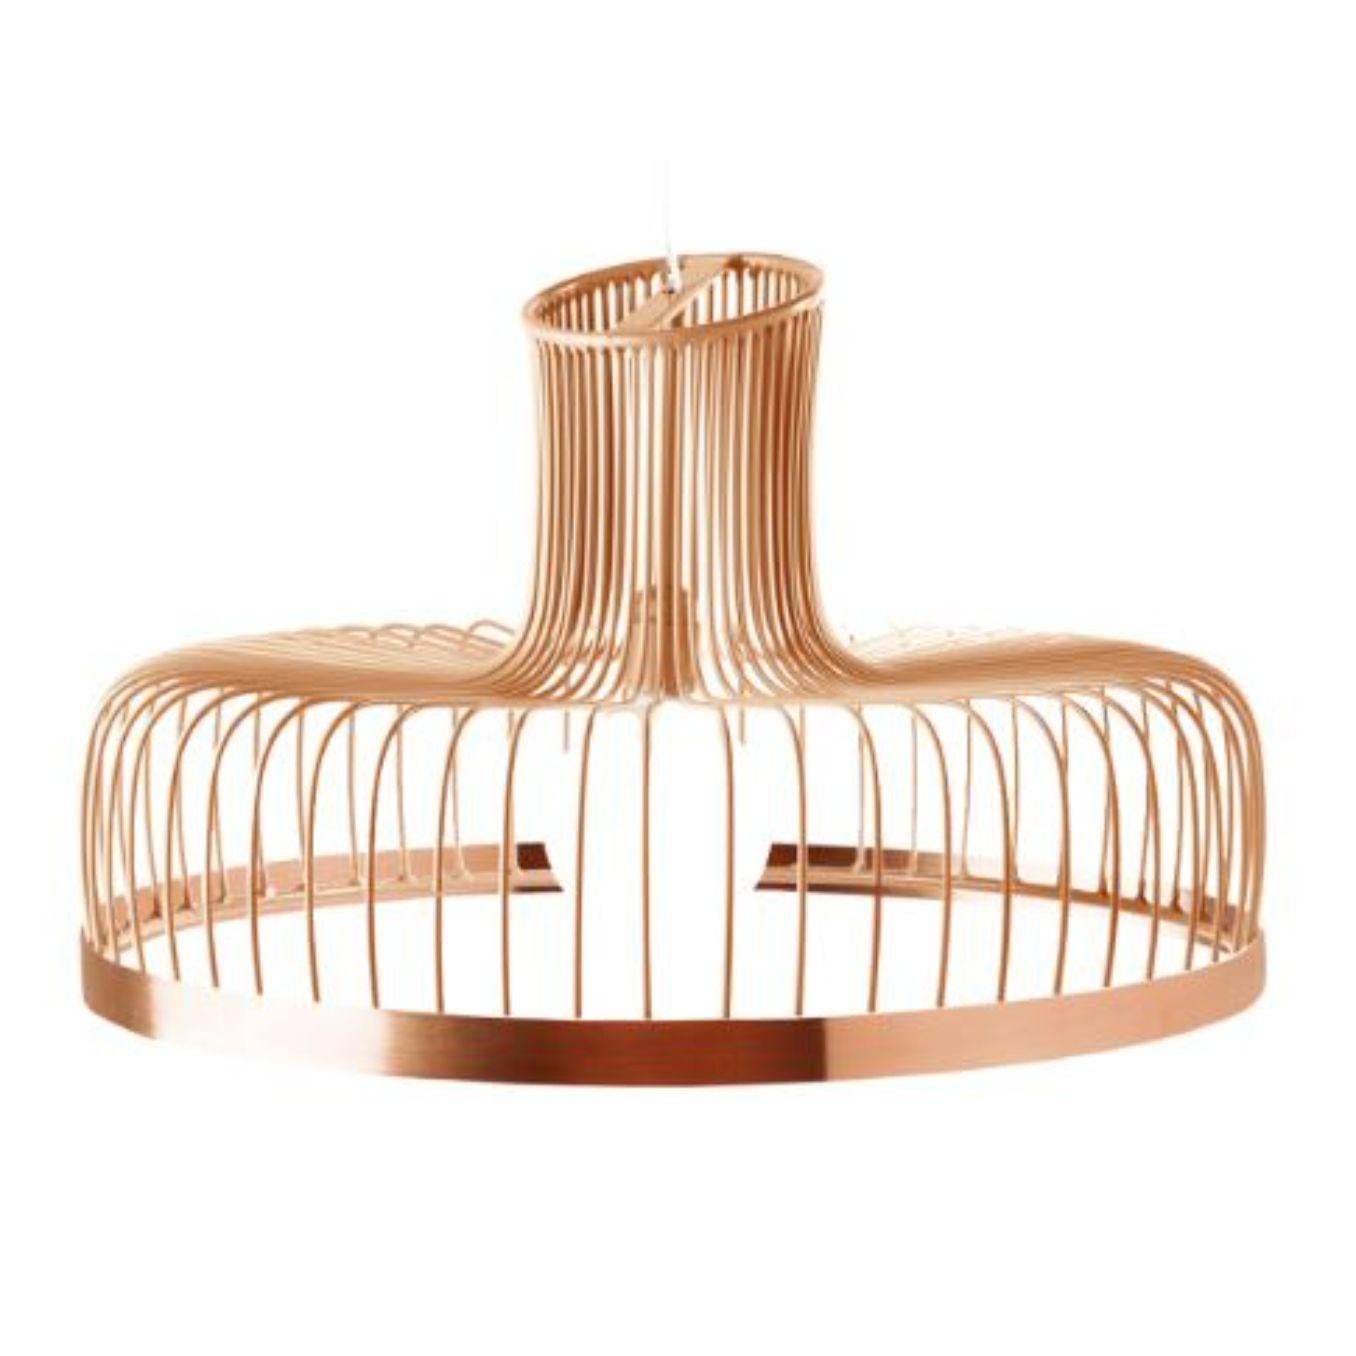 Salmon new spider suspension lamp with copper ring by Dooq
Dimensions: W 70 x D 70 x H 35 cm
Materials: lacquered metal, polished or brushed metal, copper.
Also available in different colors and materials.

Information:
230V/50Hz
E27/1x20W